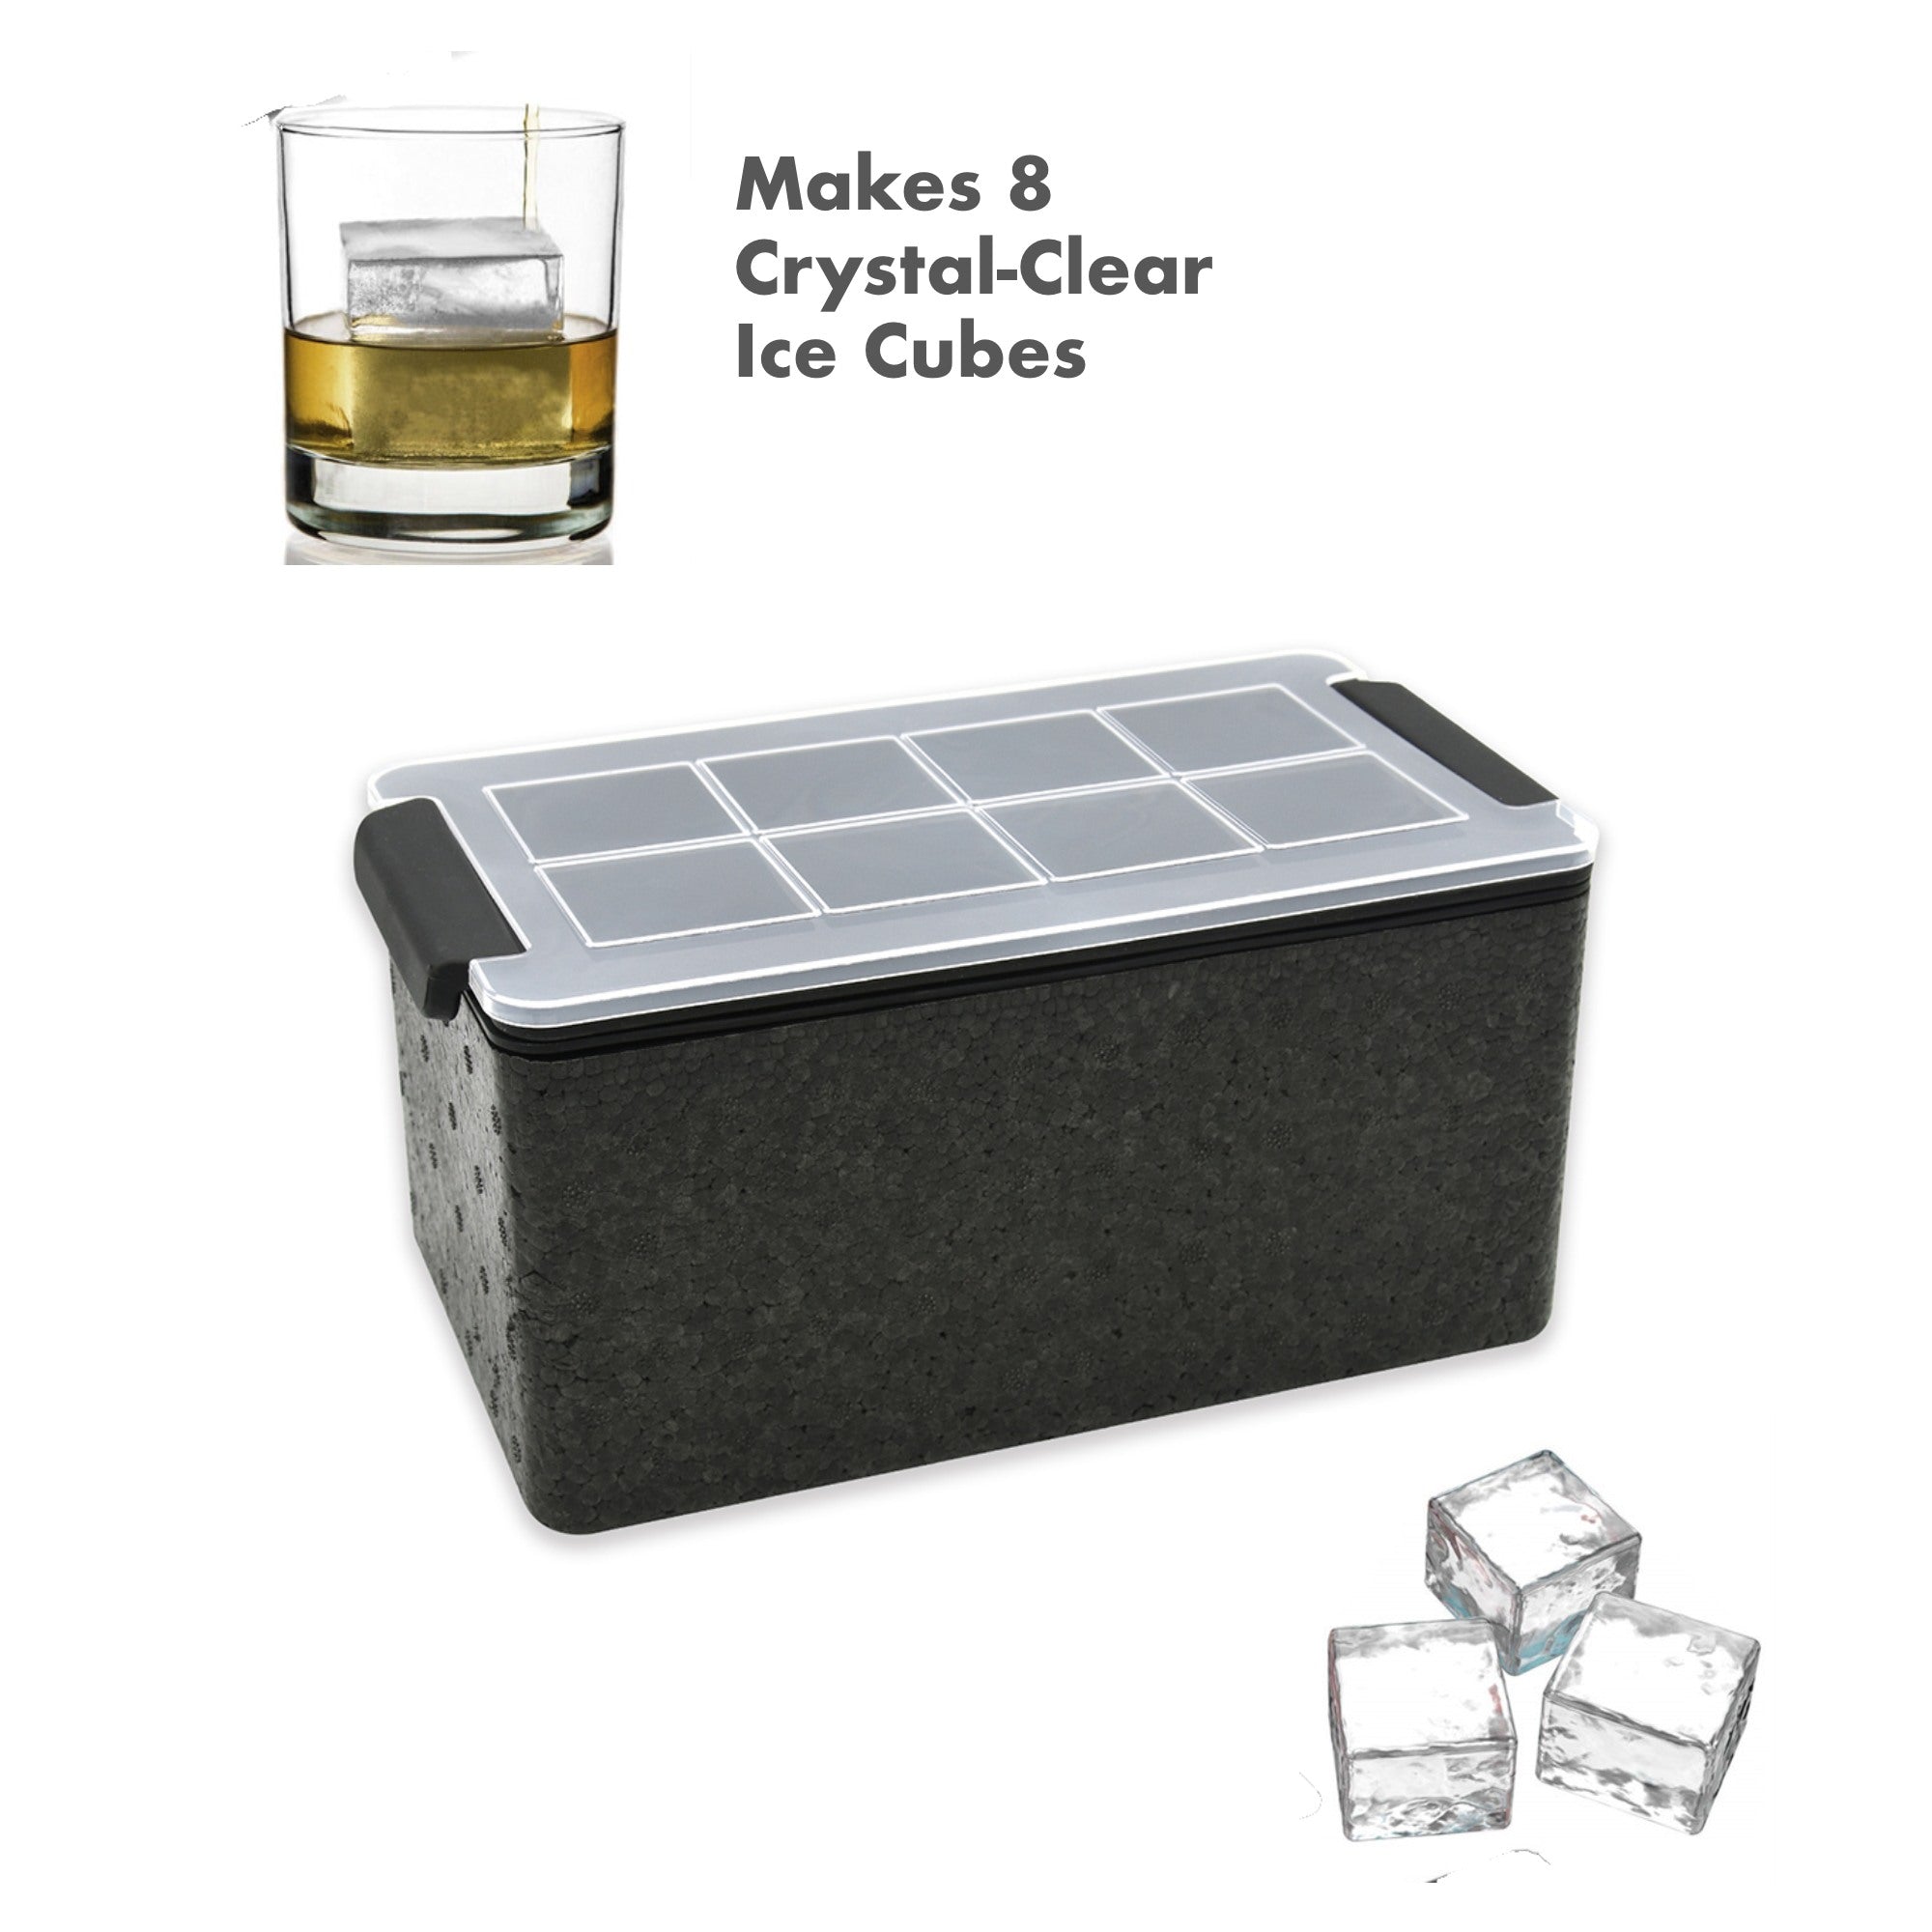 OnTheRocks: Elevate your drinks with perfectly clear ice